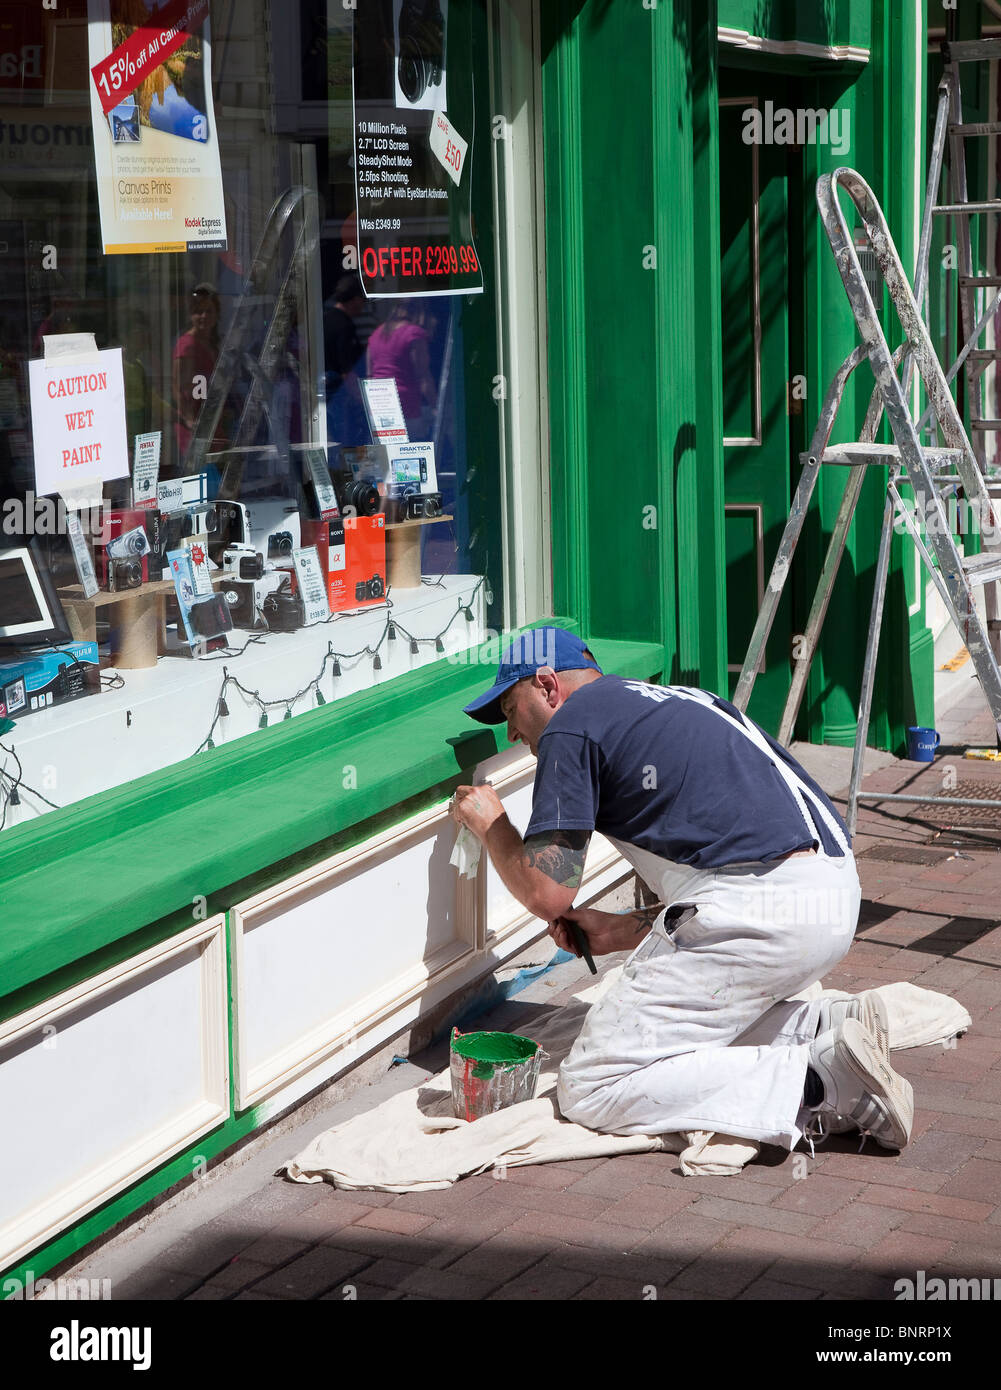 Man painting shop windowframe with caution wet paint notice in window Abergavenny Wales UK Stock Photo